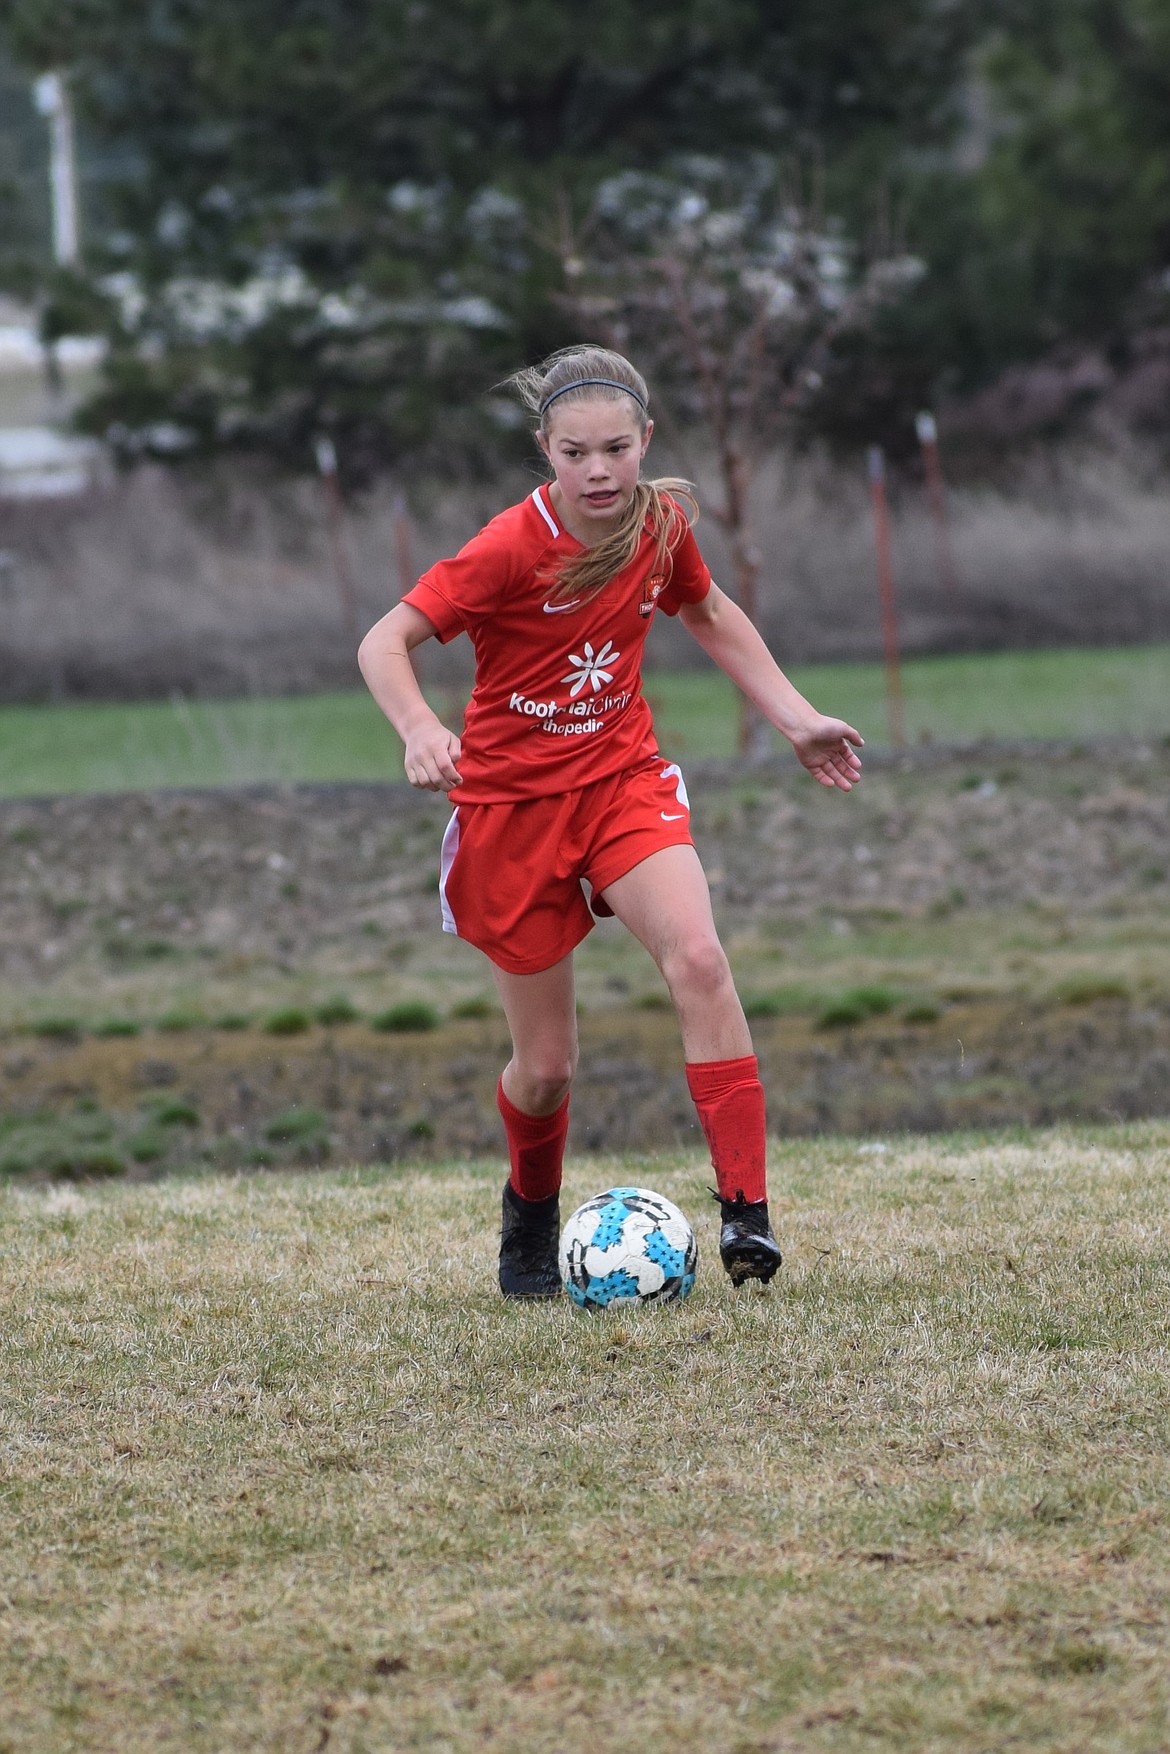 Courtesy photo
Rachel Corette of the Thorns North FC 07 Girls Red soccer team drives down the field during the April 14 game against IEYSA Storm to score her fourth goal of the season.